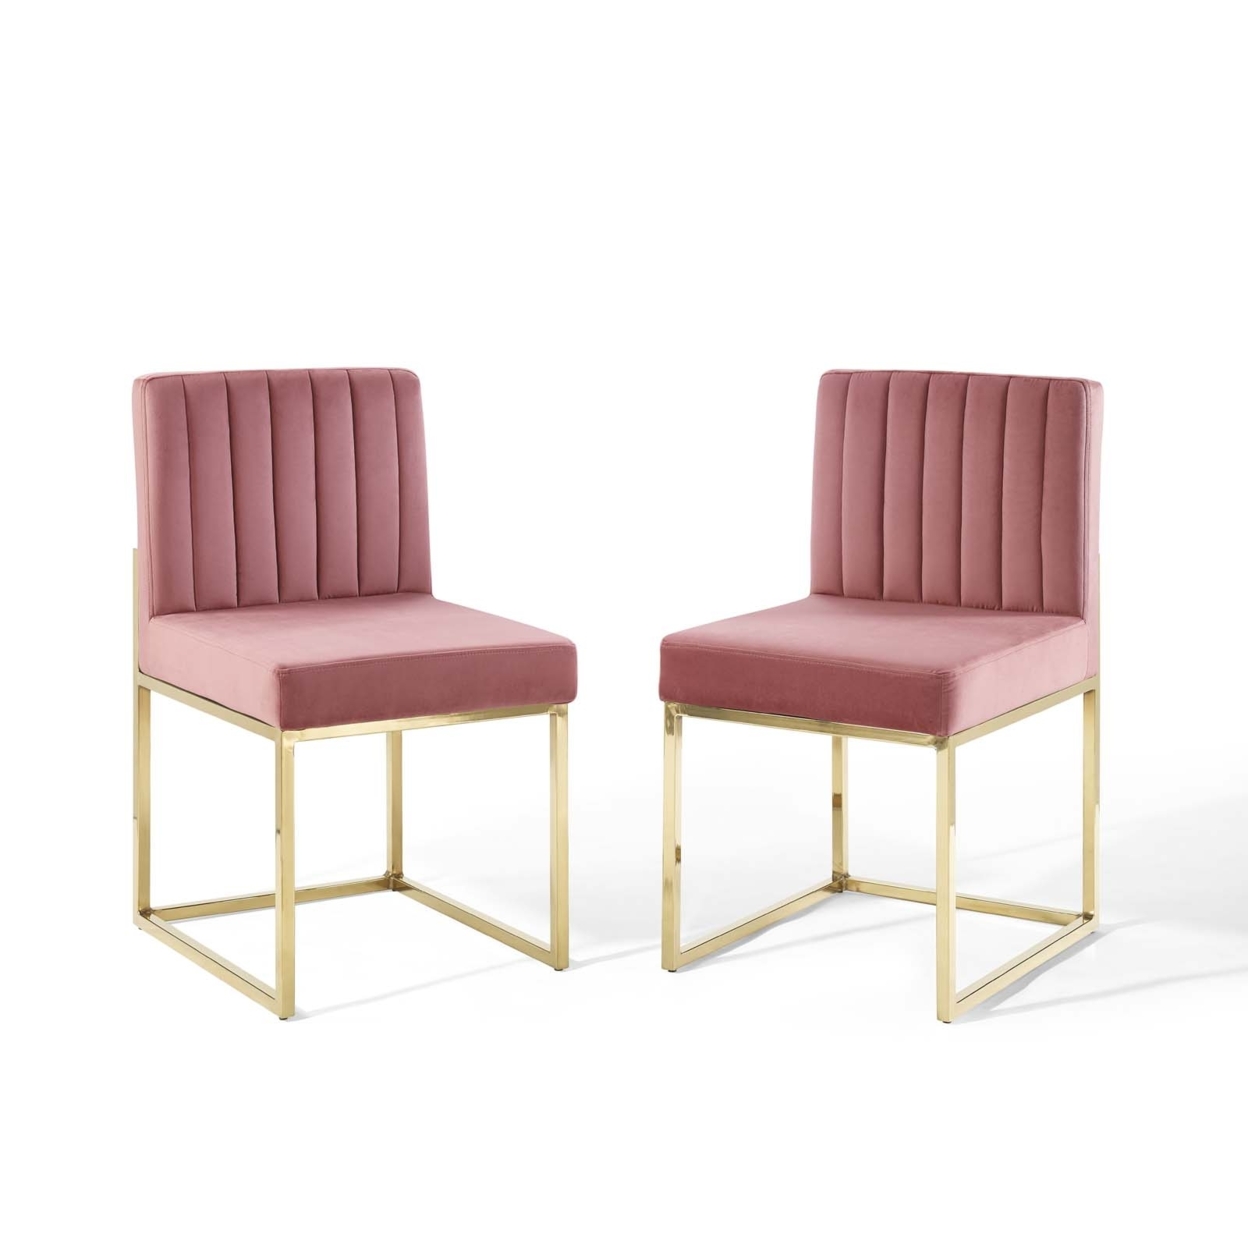 Carriage Dining Chair Performance Velvet Set of 2, Gold Dusty Rose